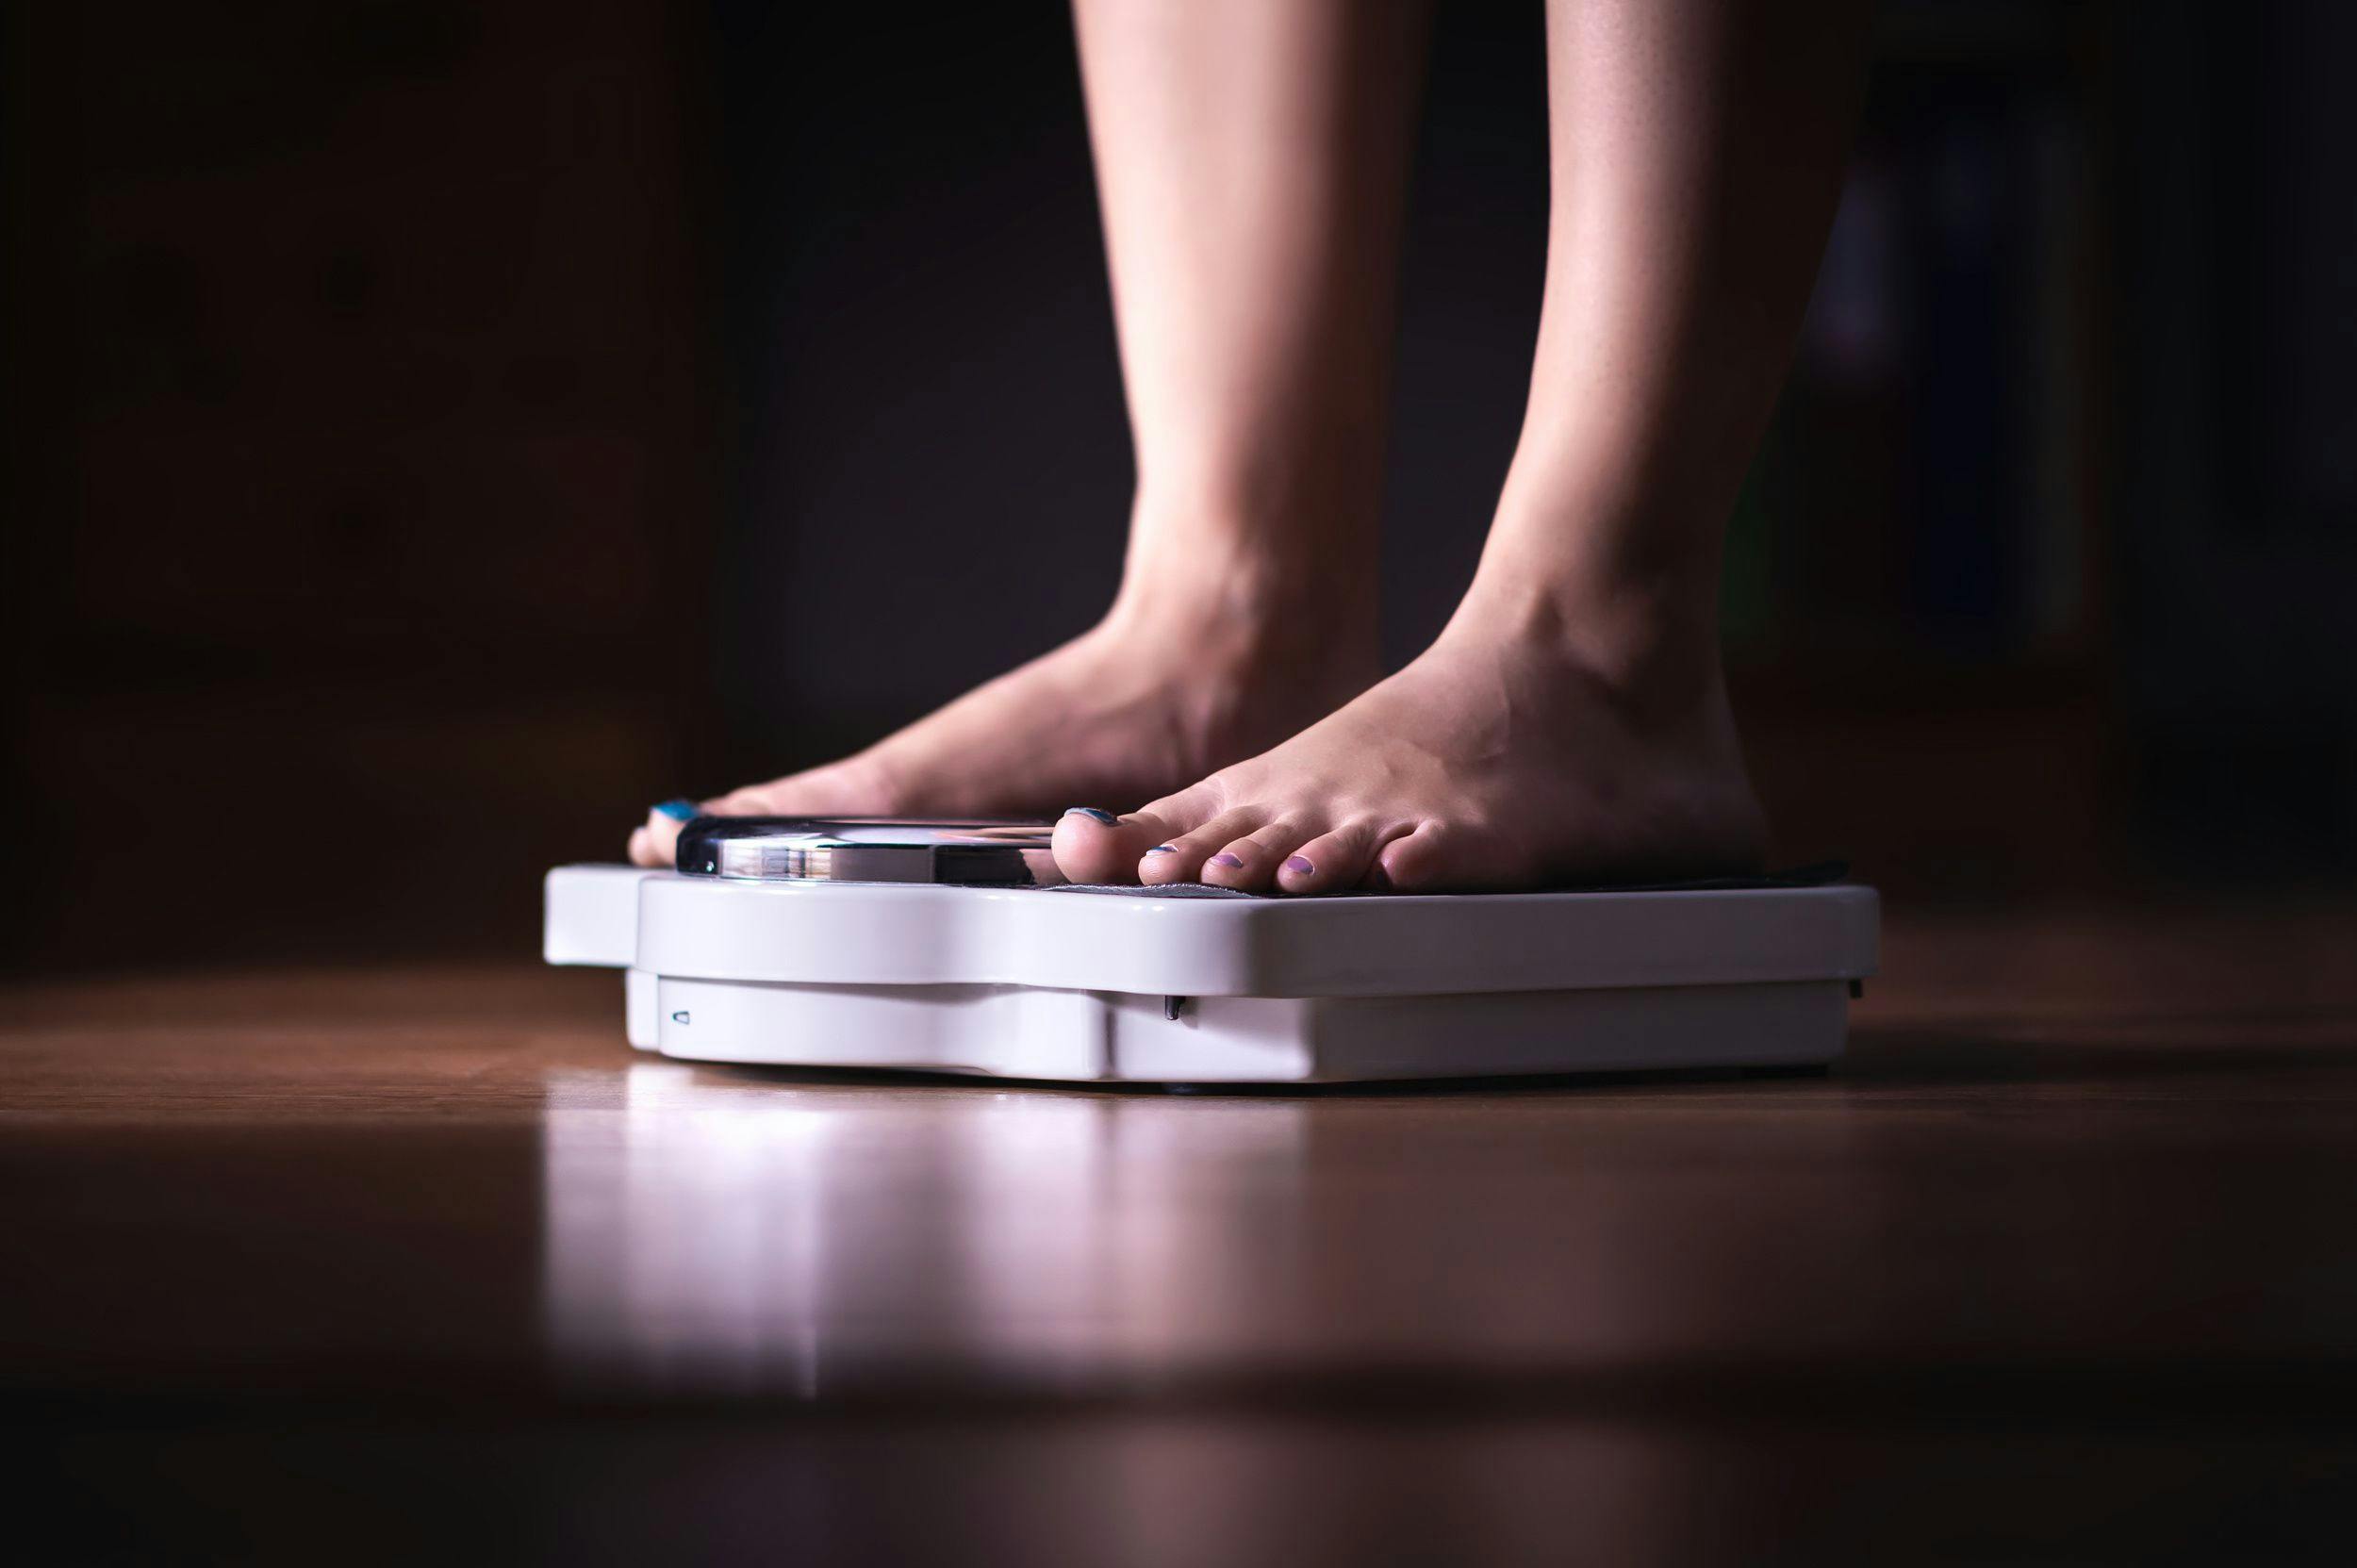 Study suggests rising obesity prevalence may have altered perceptions of healthy body weights | Image Credit: © terovesalainen - © terovesalainen - stock.adobe.com.